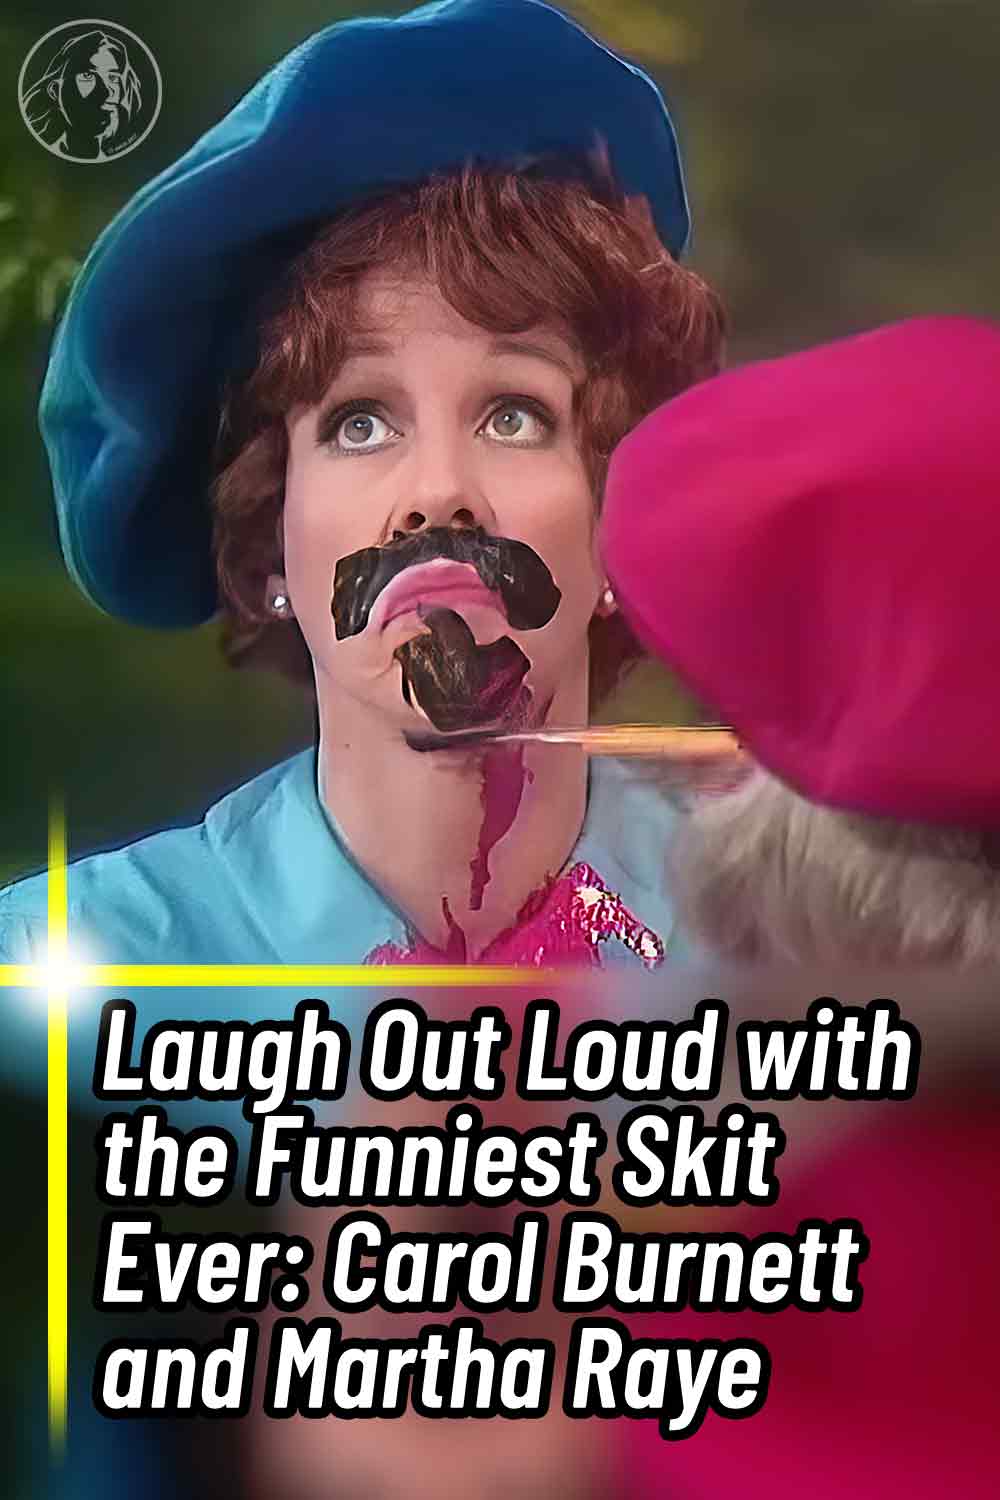 Laugh Out Loud with the Funniest Skit Ever: Carol Burnett and Martha Raye